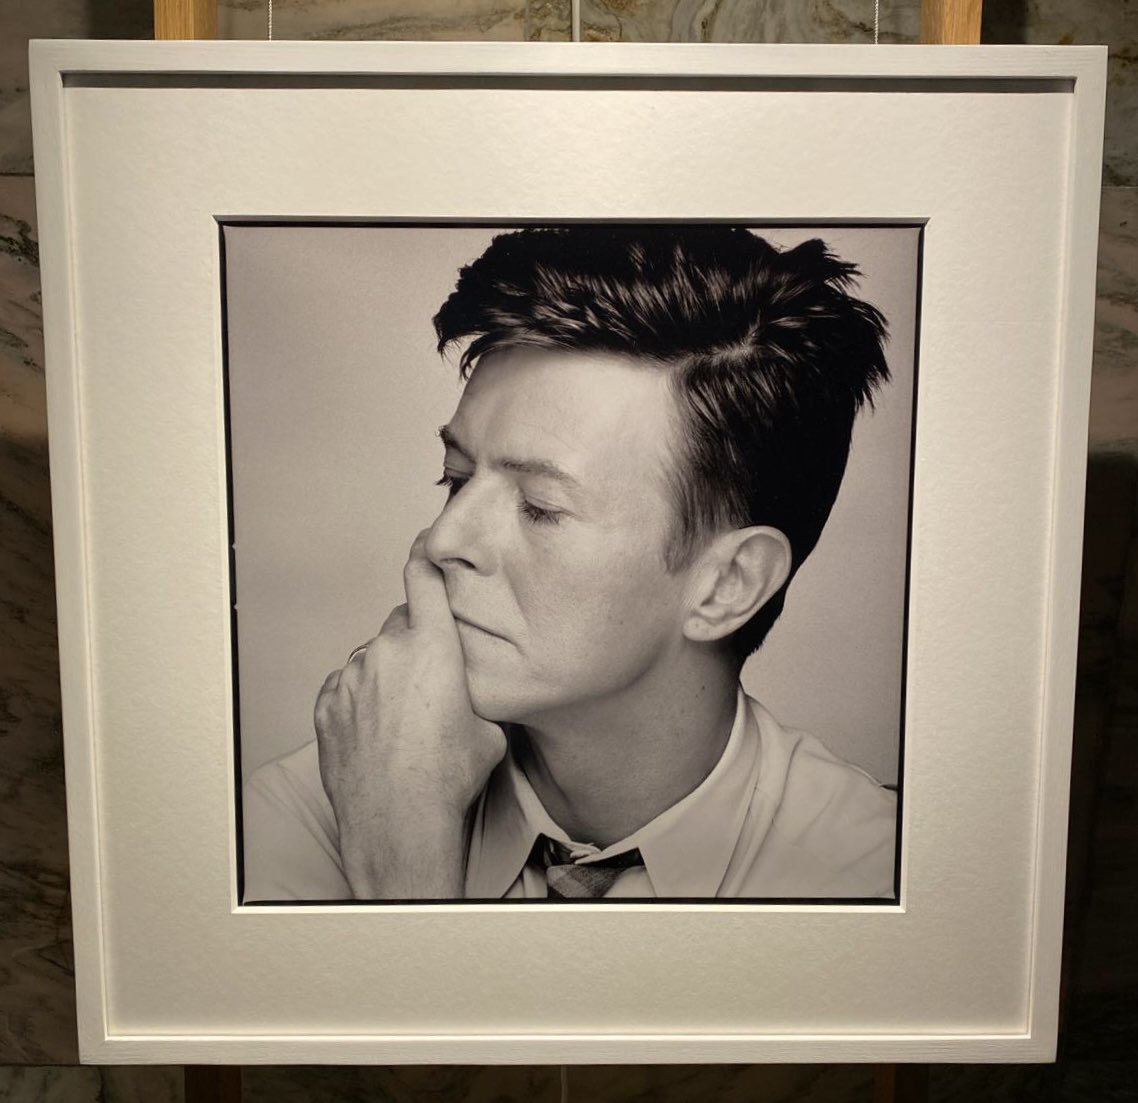 David Bowie by Kevin Davies from the 'David Bowie - A London Day' exhibition earlier this year 👨‍🎤⚡️ @NewWaveAndPunk @Schnitzel63 @phatalstu @FatOldAnarchist This photo of the photo is by me 😎🖤